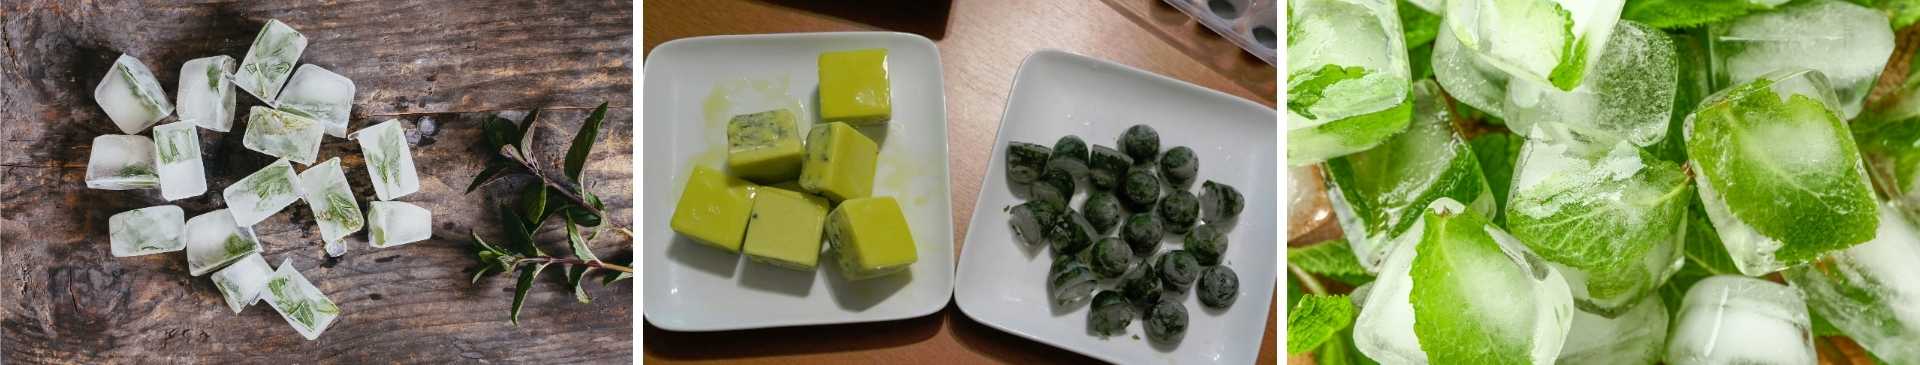 How to Make Herbal Ice Cubes to Preserve Your Fresh Herb Harvest